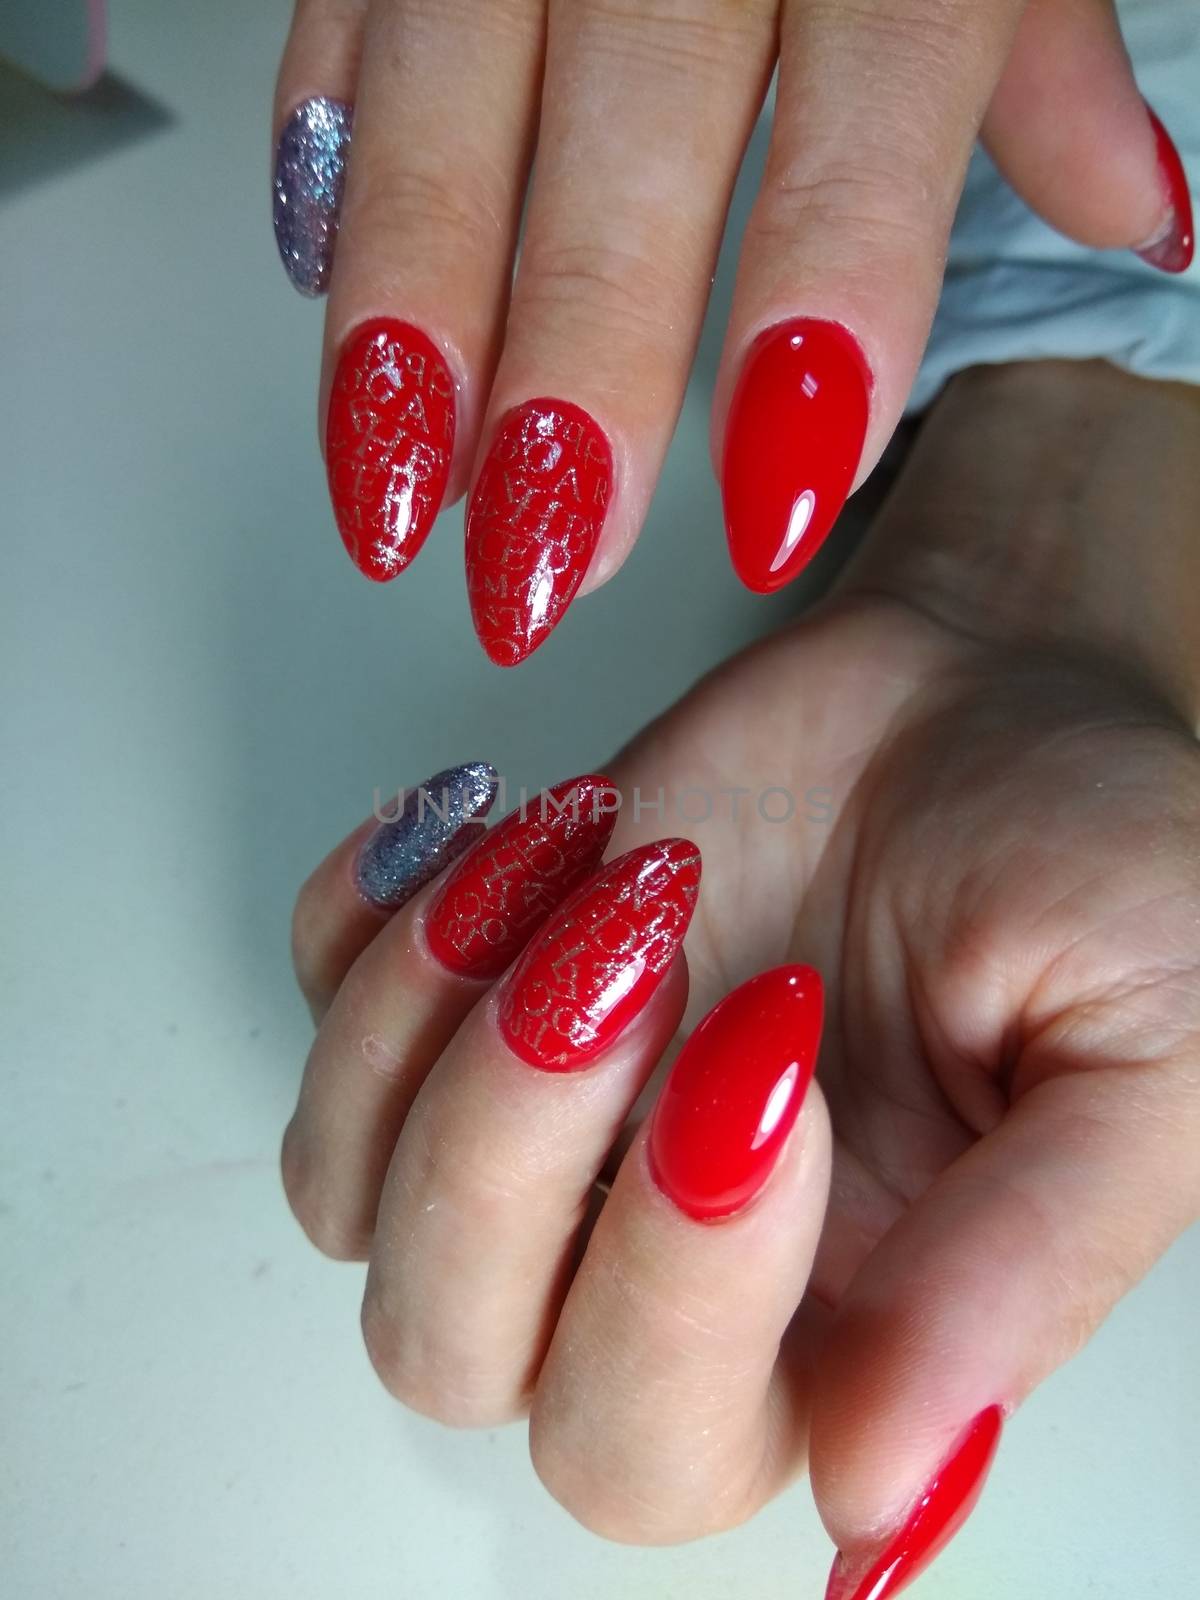 Red manicure design by SmirMaxStock